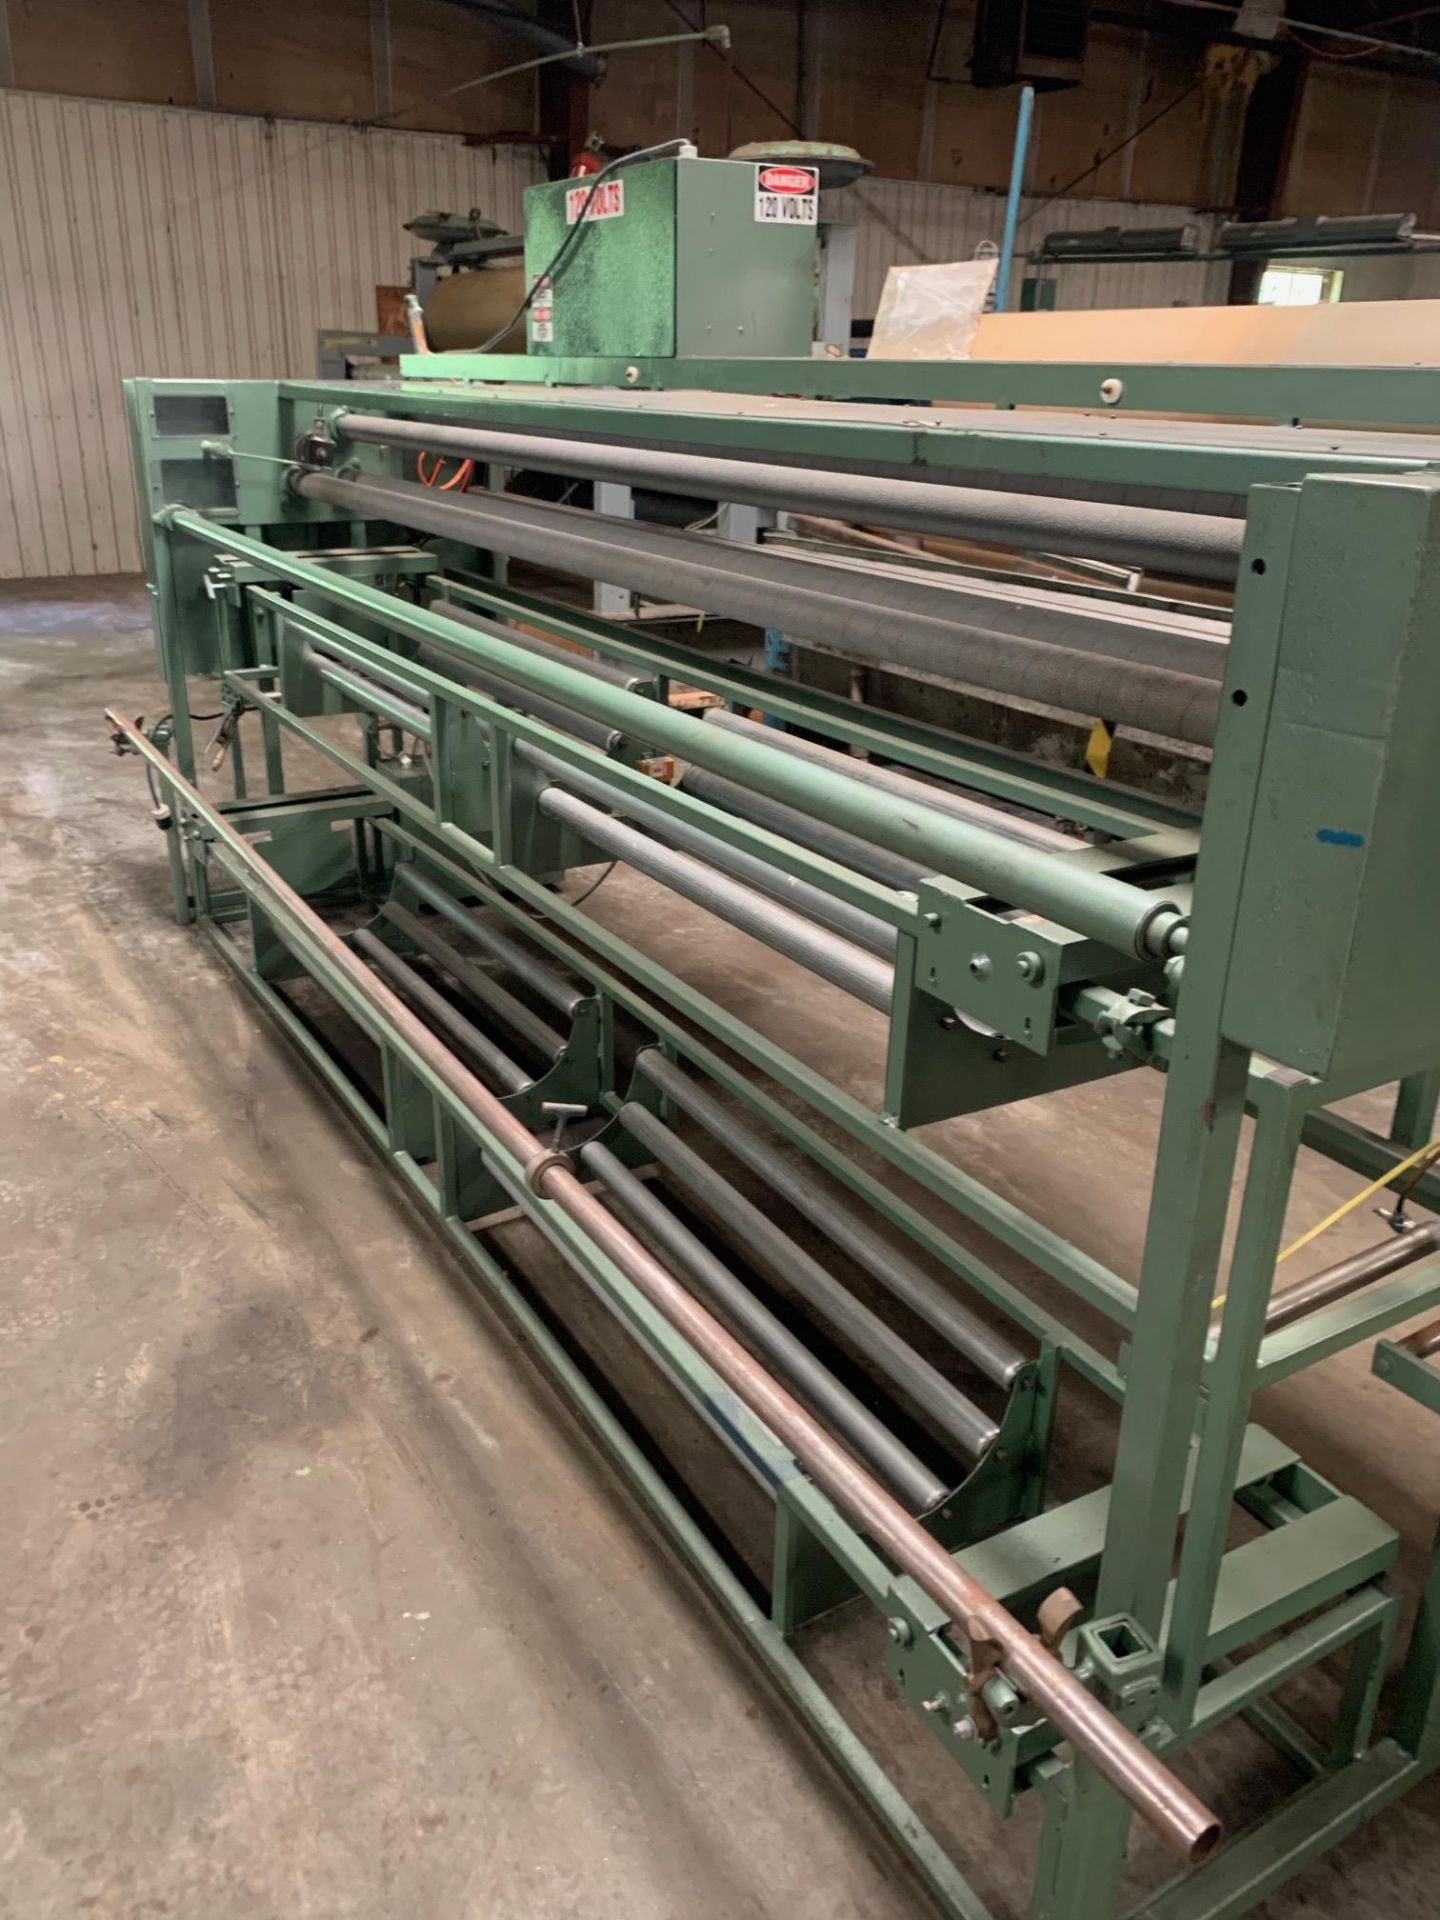 Cutting panels machine 10' 120 volts, Rigging Fee: $150 - Image 3 of 13